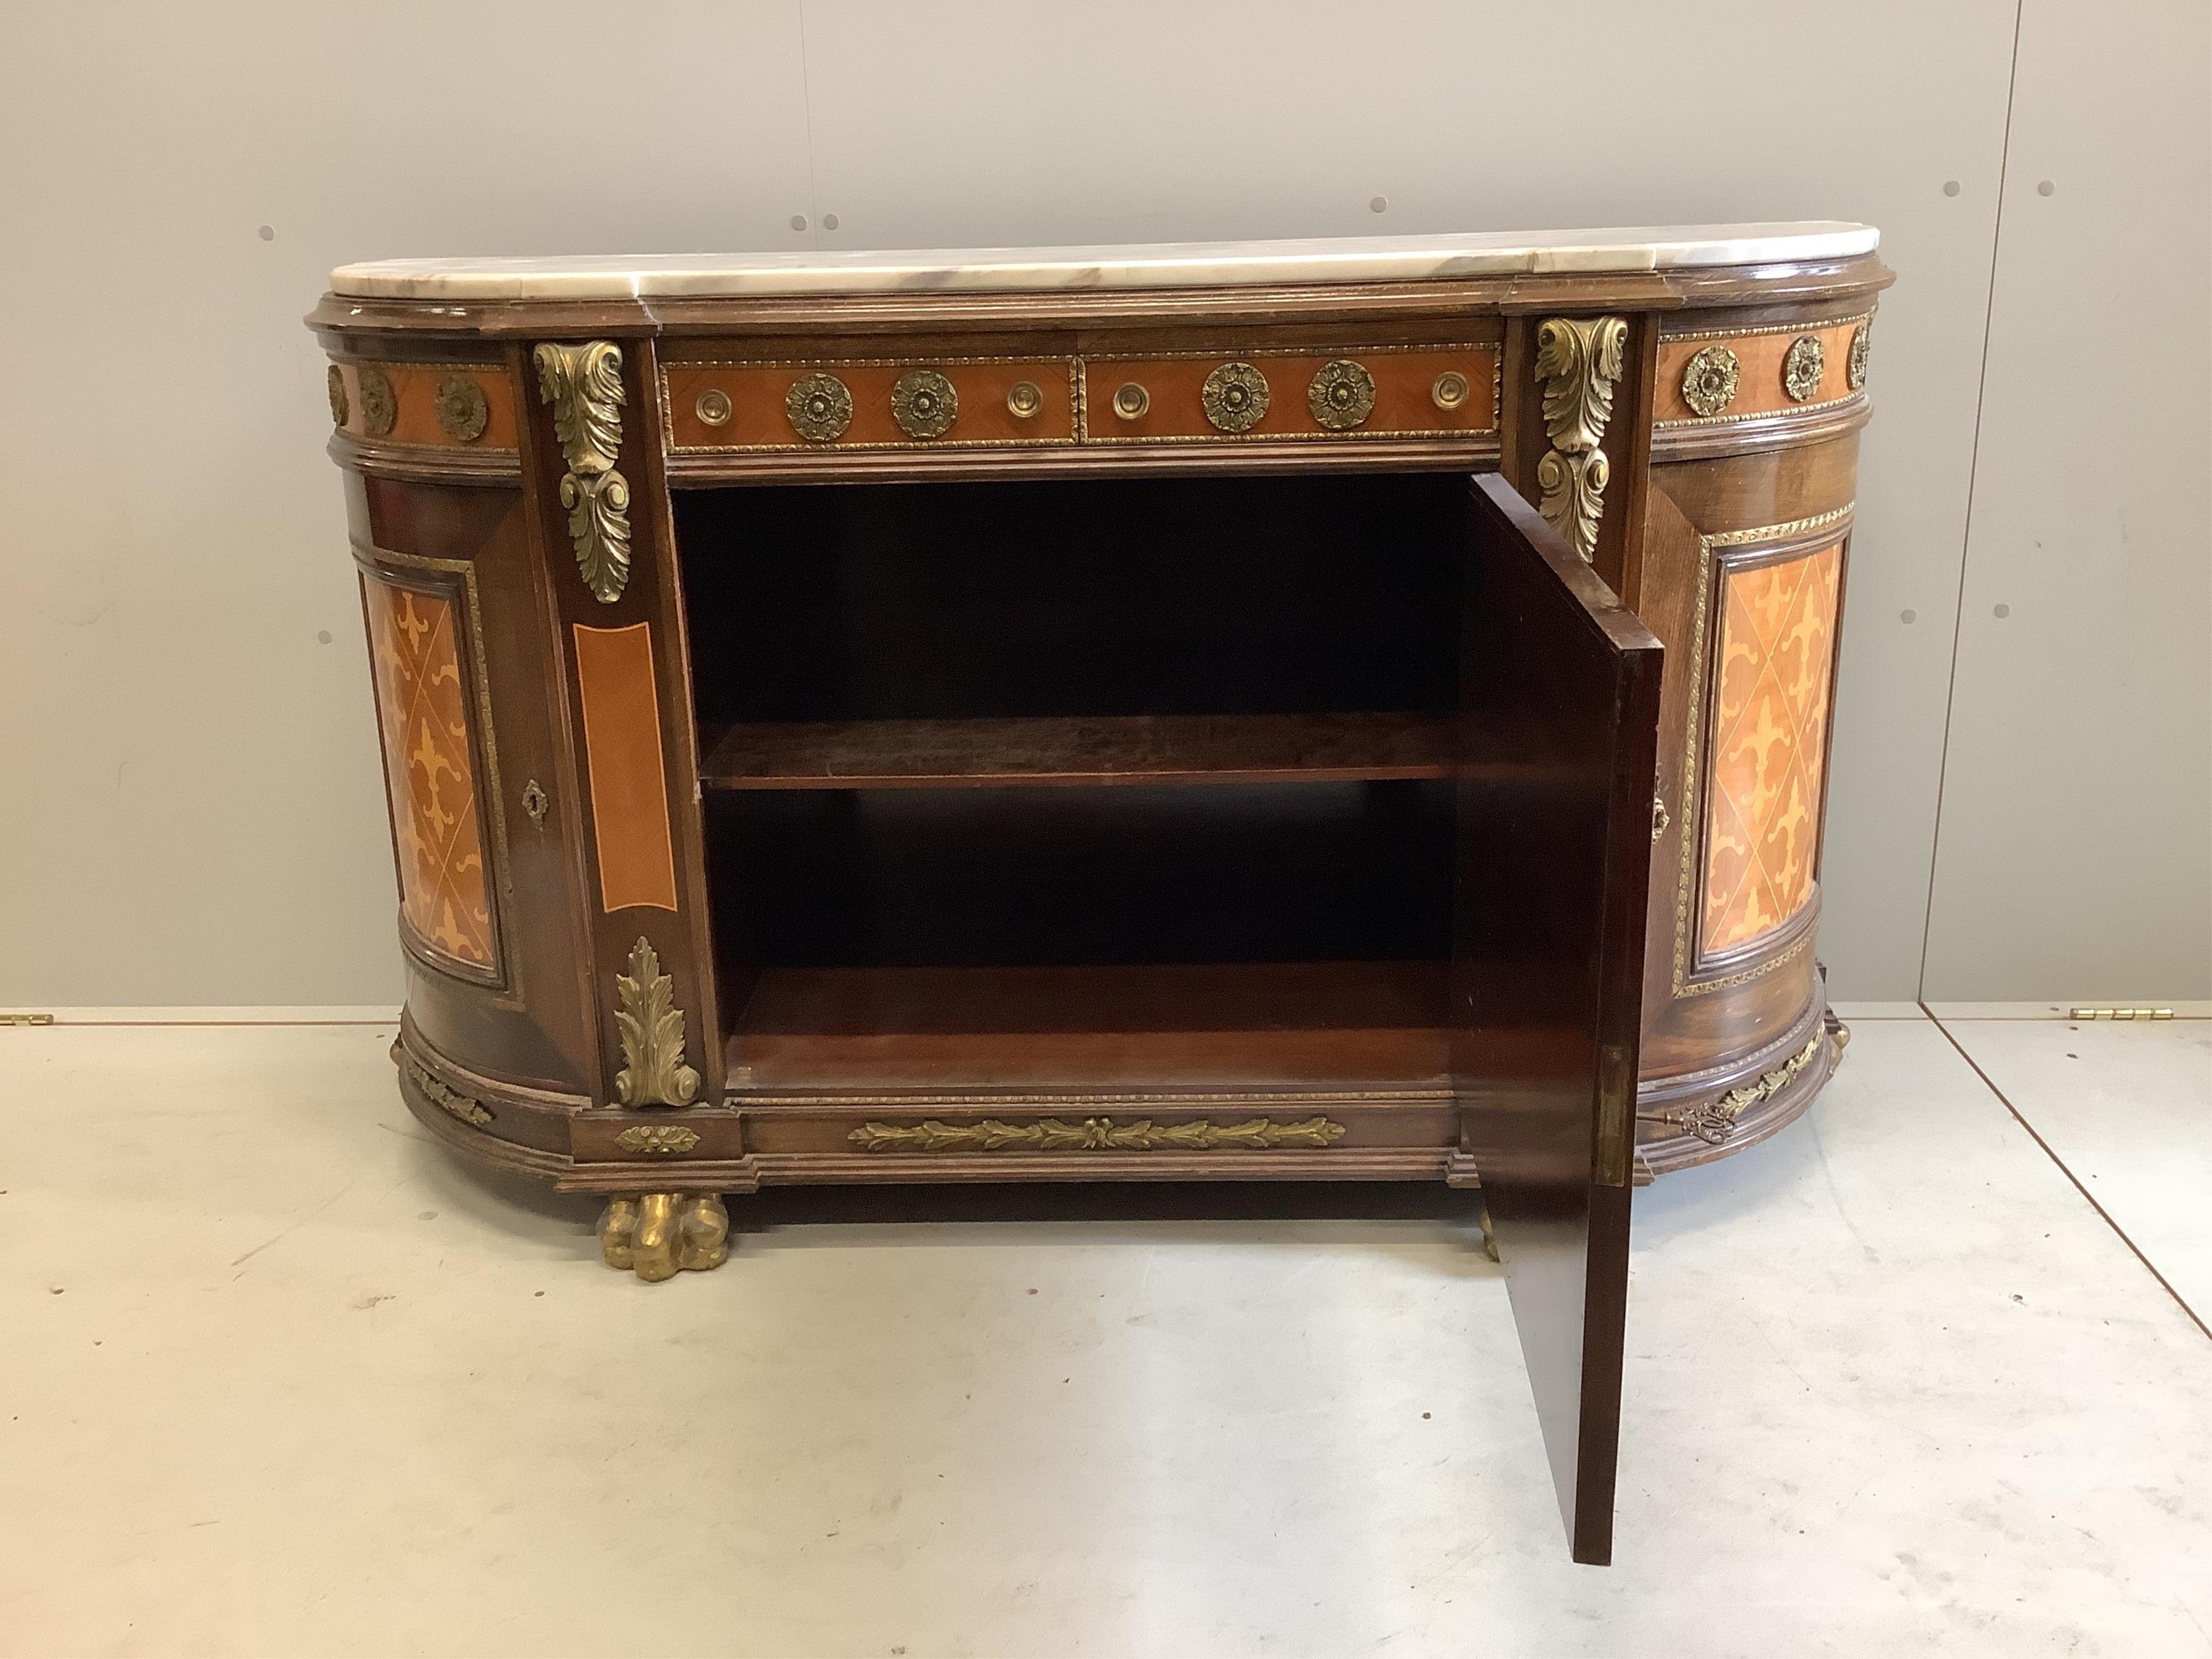 A Louis XV style inlaid marble topped side cabinet, width 144cm, depth 46cm, height 88cm. Condition - fair